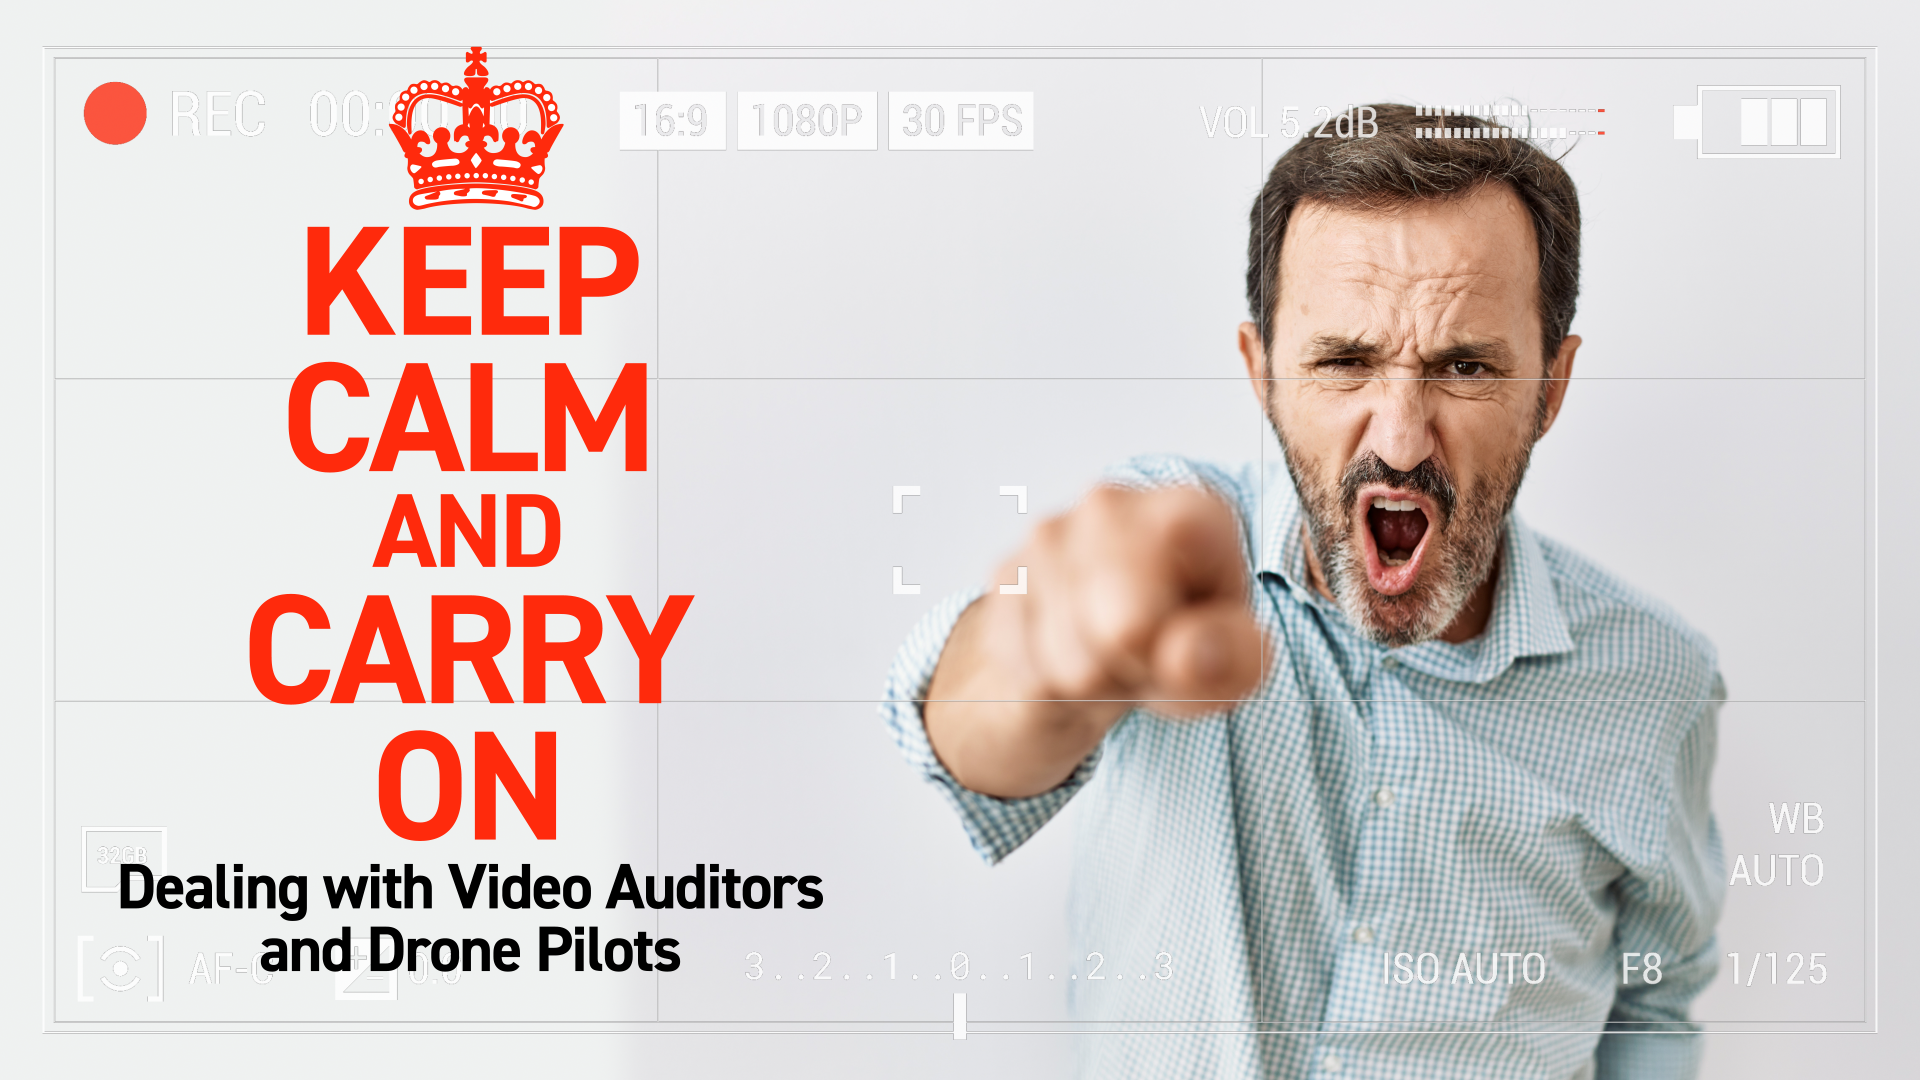 Dealing with Video Auditors and Drone Pilots